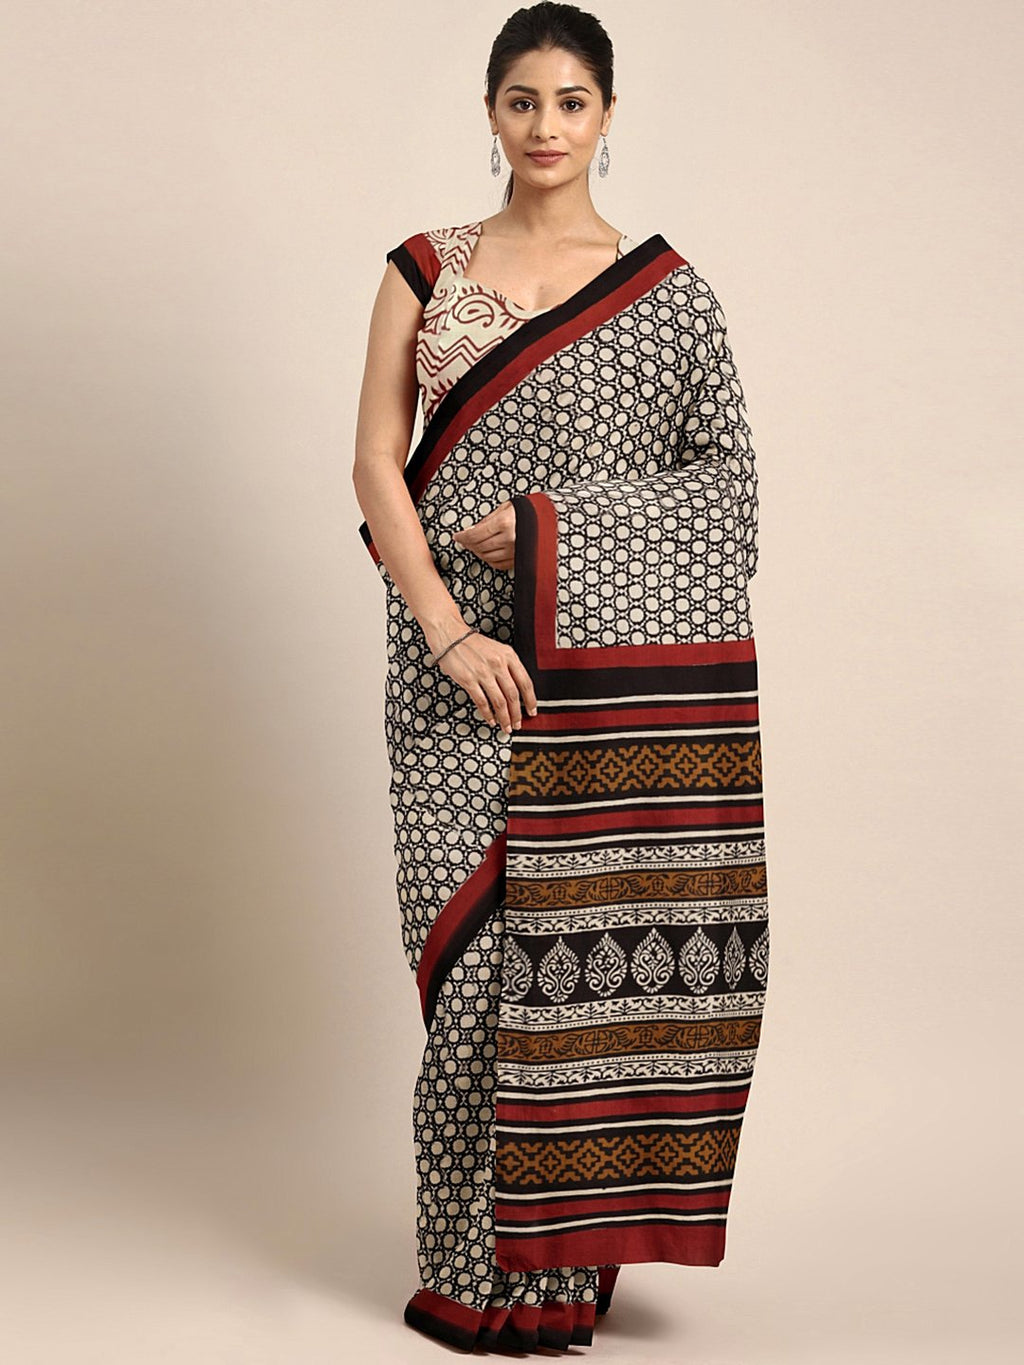 Off-White & Black Bagh Hand Block Print Handcrafted Saree-Saree-Kalakari India-BHKPSA0028-Cotton, Dabu, Geographical Indication, Hand Blocks, Hand Crafted, Heritage Prints, Indigo, Natural Dyes, Sarees, Sustainable Fabrics-[Linen,Ethnic,wear,Fashionista,Handloom,Handicraft,Indigo,blockprint,block,print,Cotton,Chanderi,Blue, latest,classy,party,bollywood,trendy,summer,style,traditional,formal,elegant,unique,style,hand,block,print, dabu,booti,gift,present,glamorous,affordable,collectible,Sari,Sare